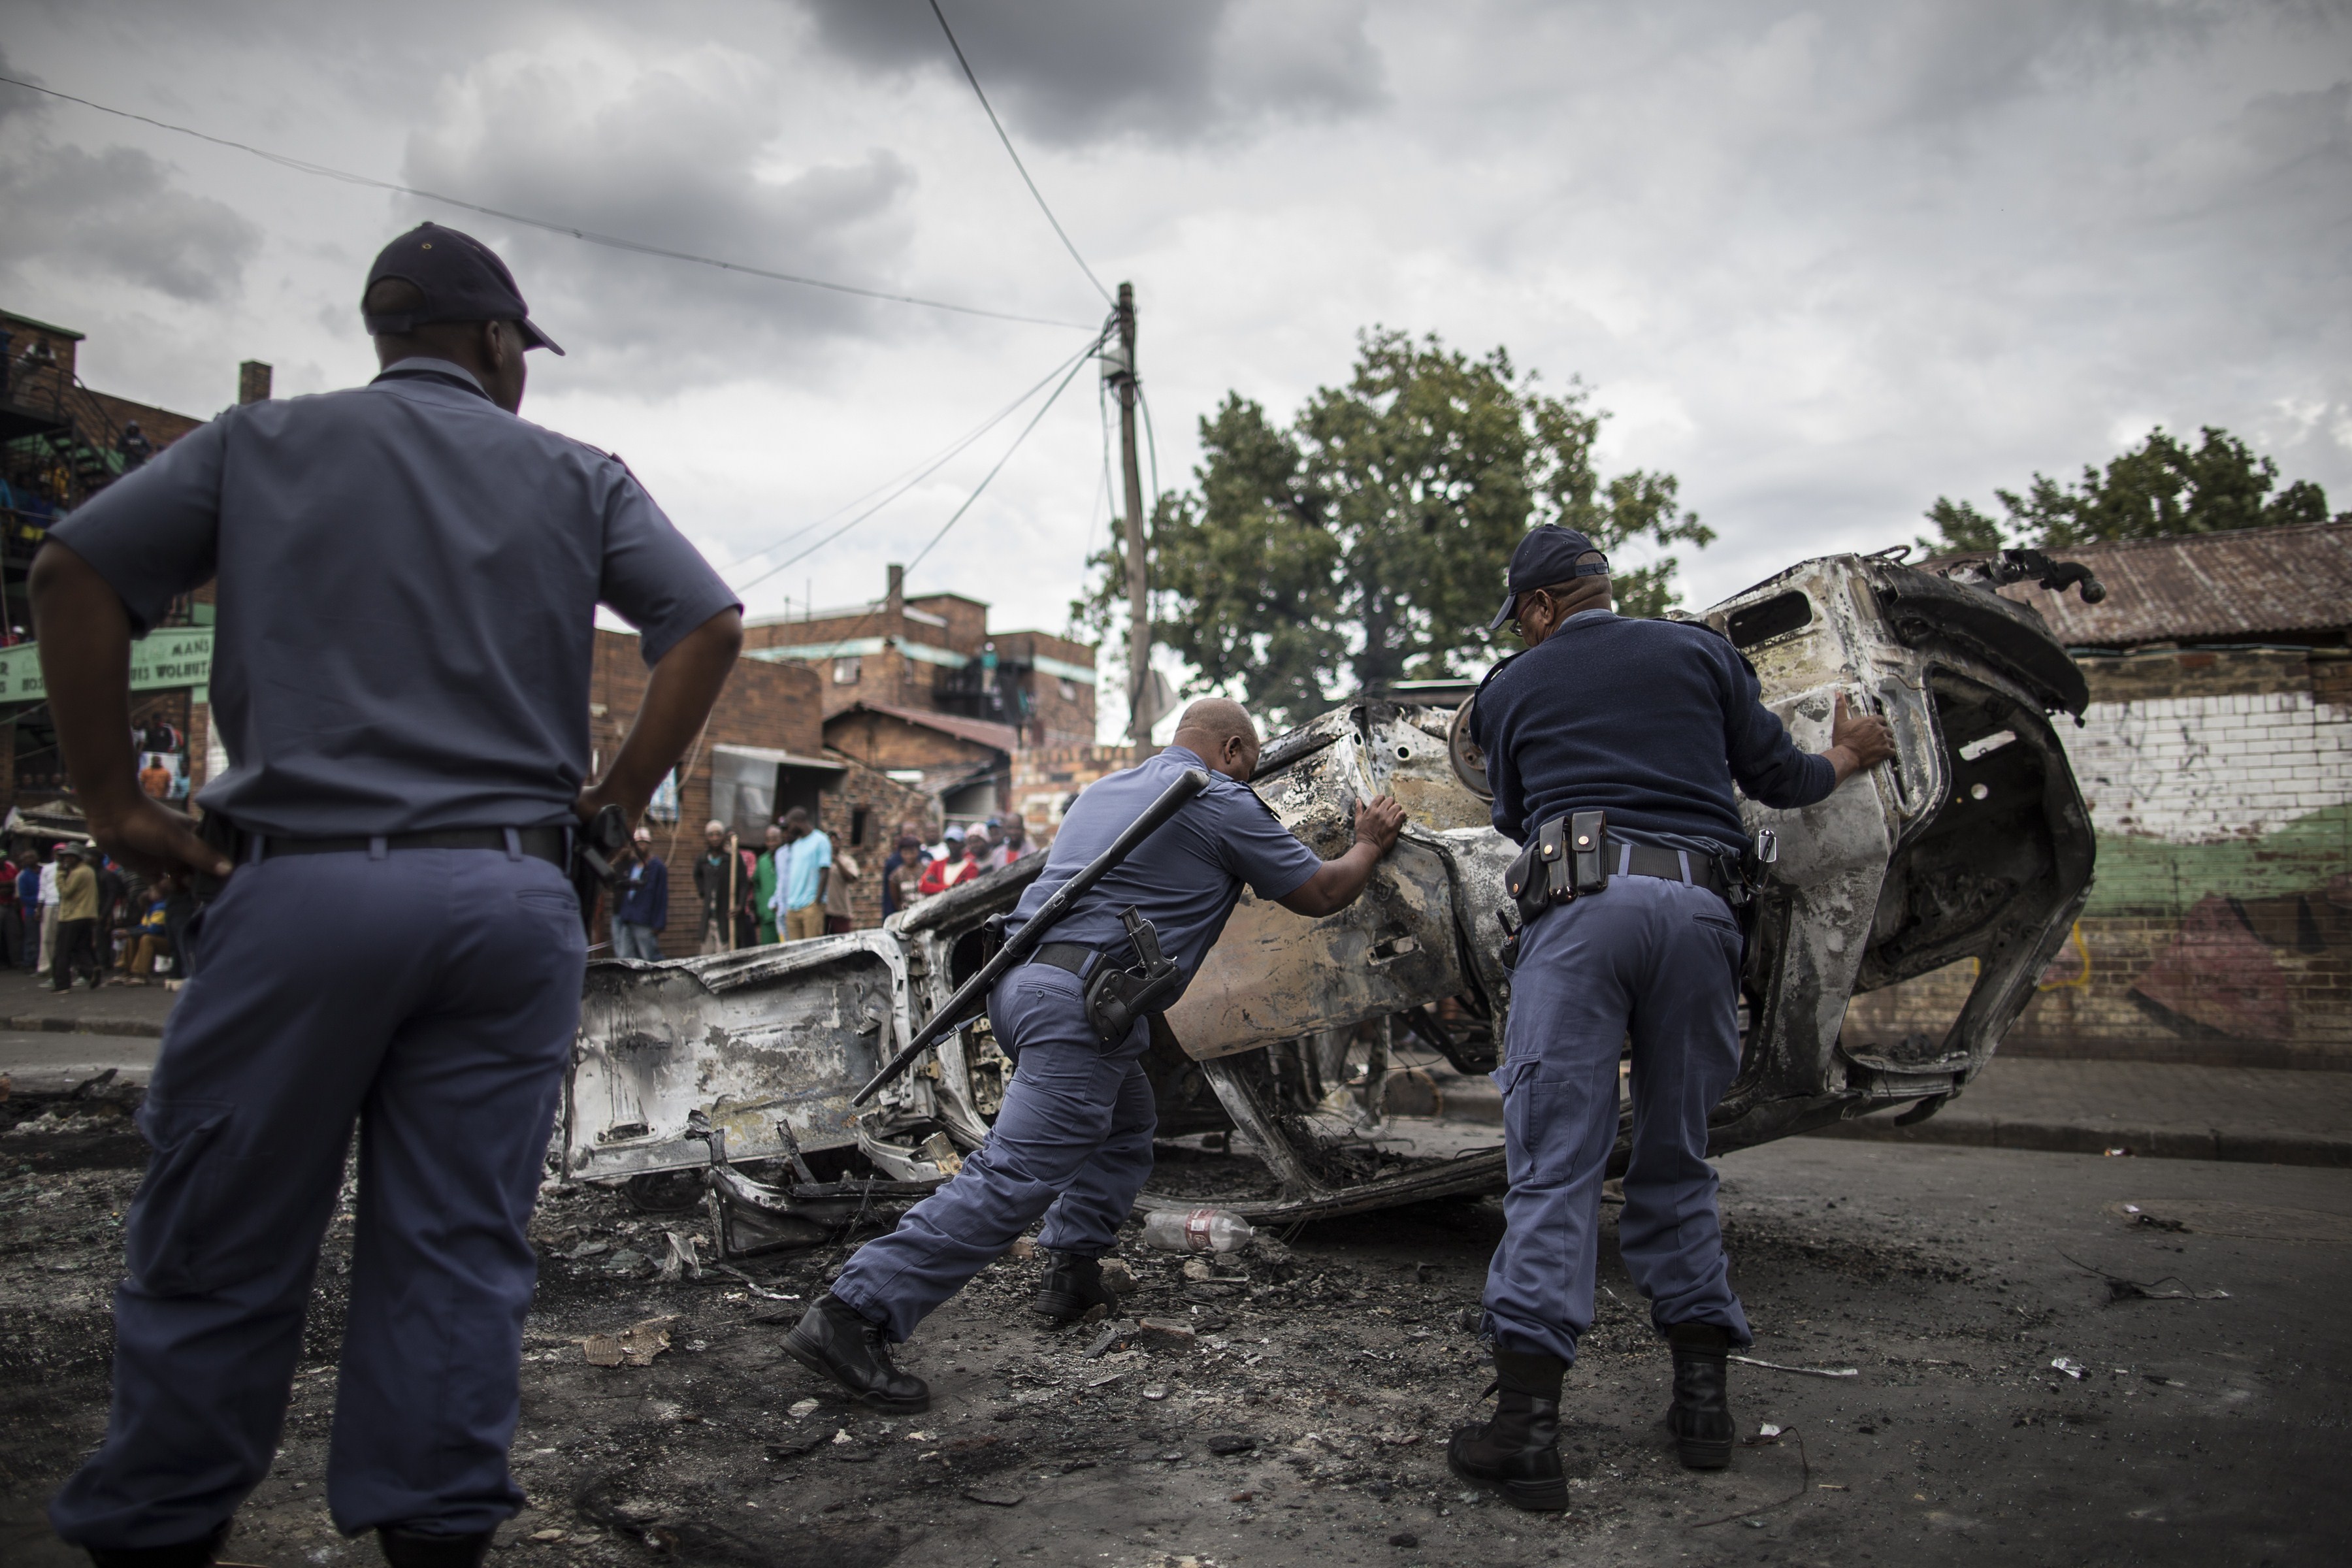 South Africa Anti Immigrant Violence Foreign Owned Shops Cars Torched In Johannesburg Cbs News 